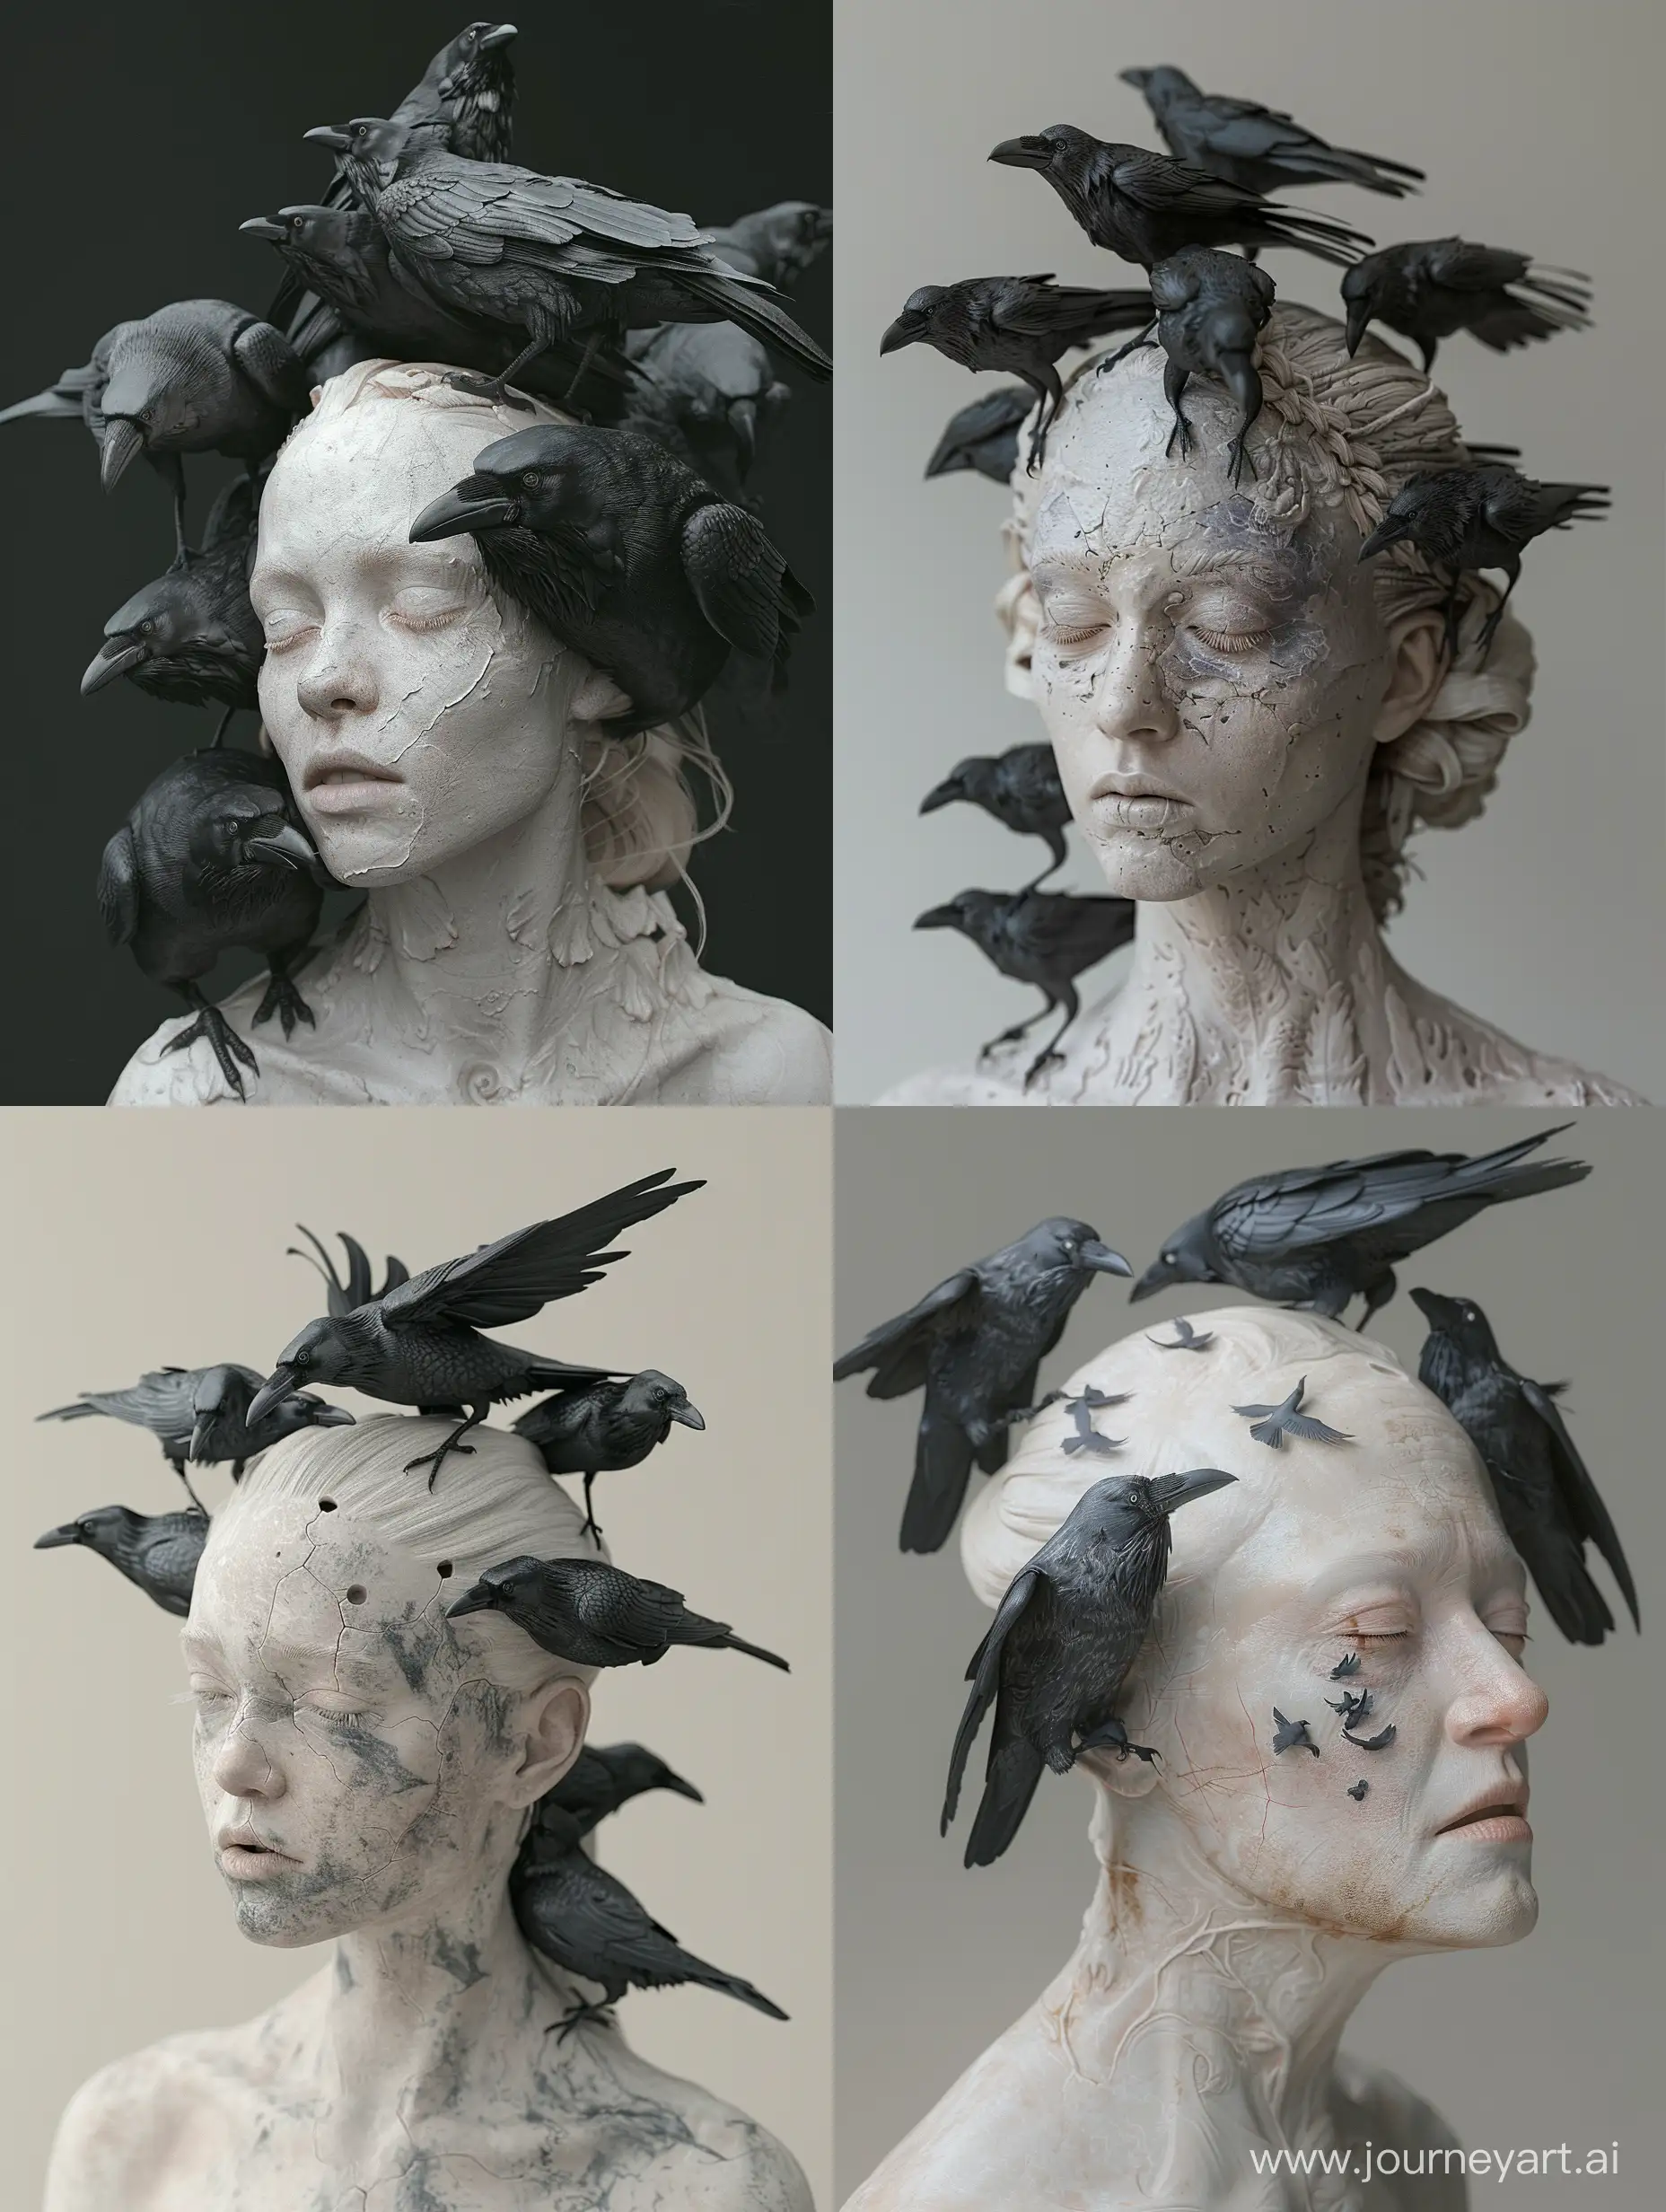 a statue of a woman with ravens on her head, a surrealist sculpture, inspired by Yanjun Cheng, tumblr, with pale skin, all face covered with ravens, angelina stroganova, daily render